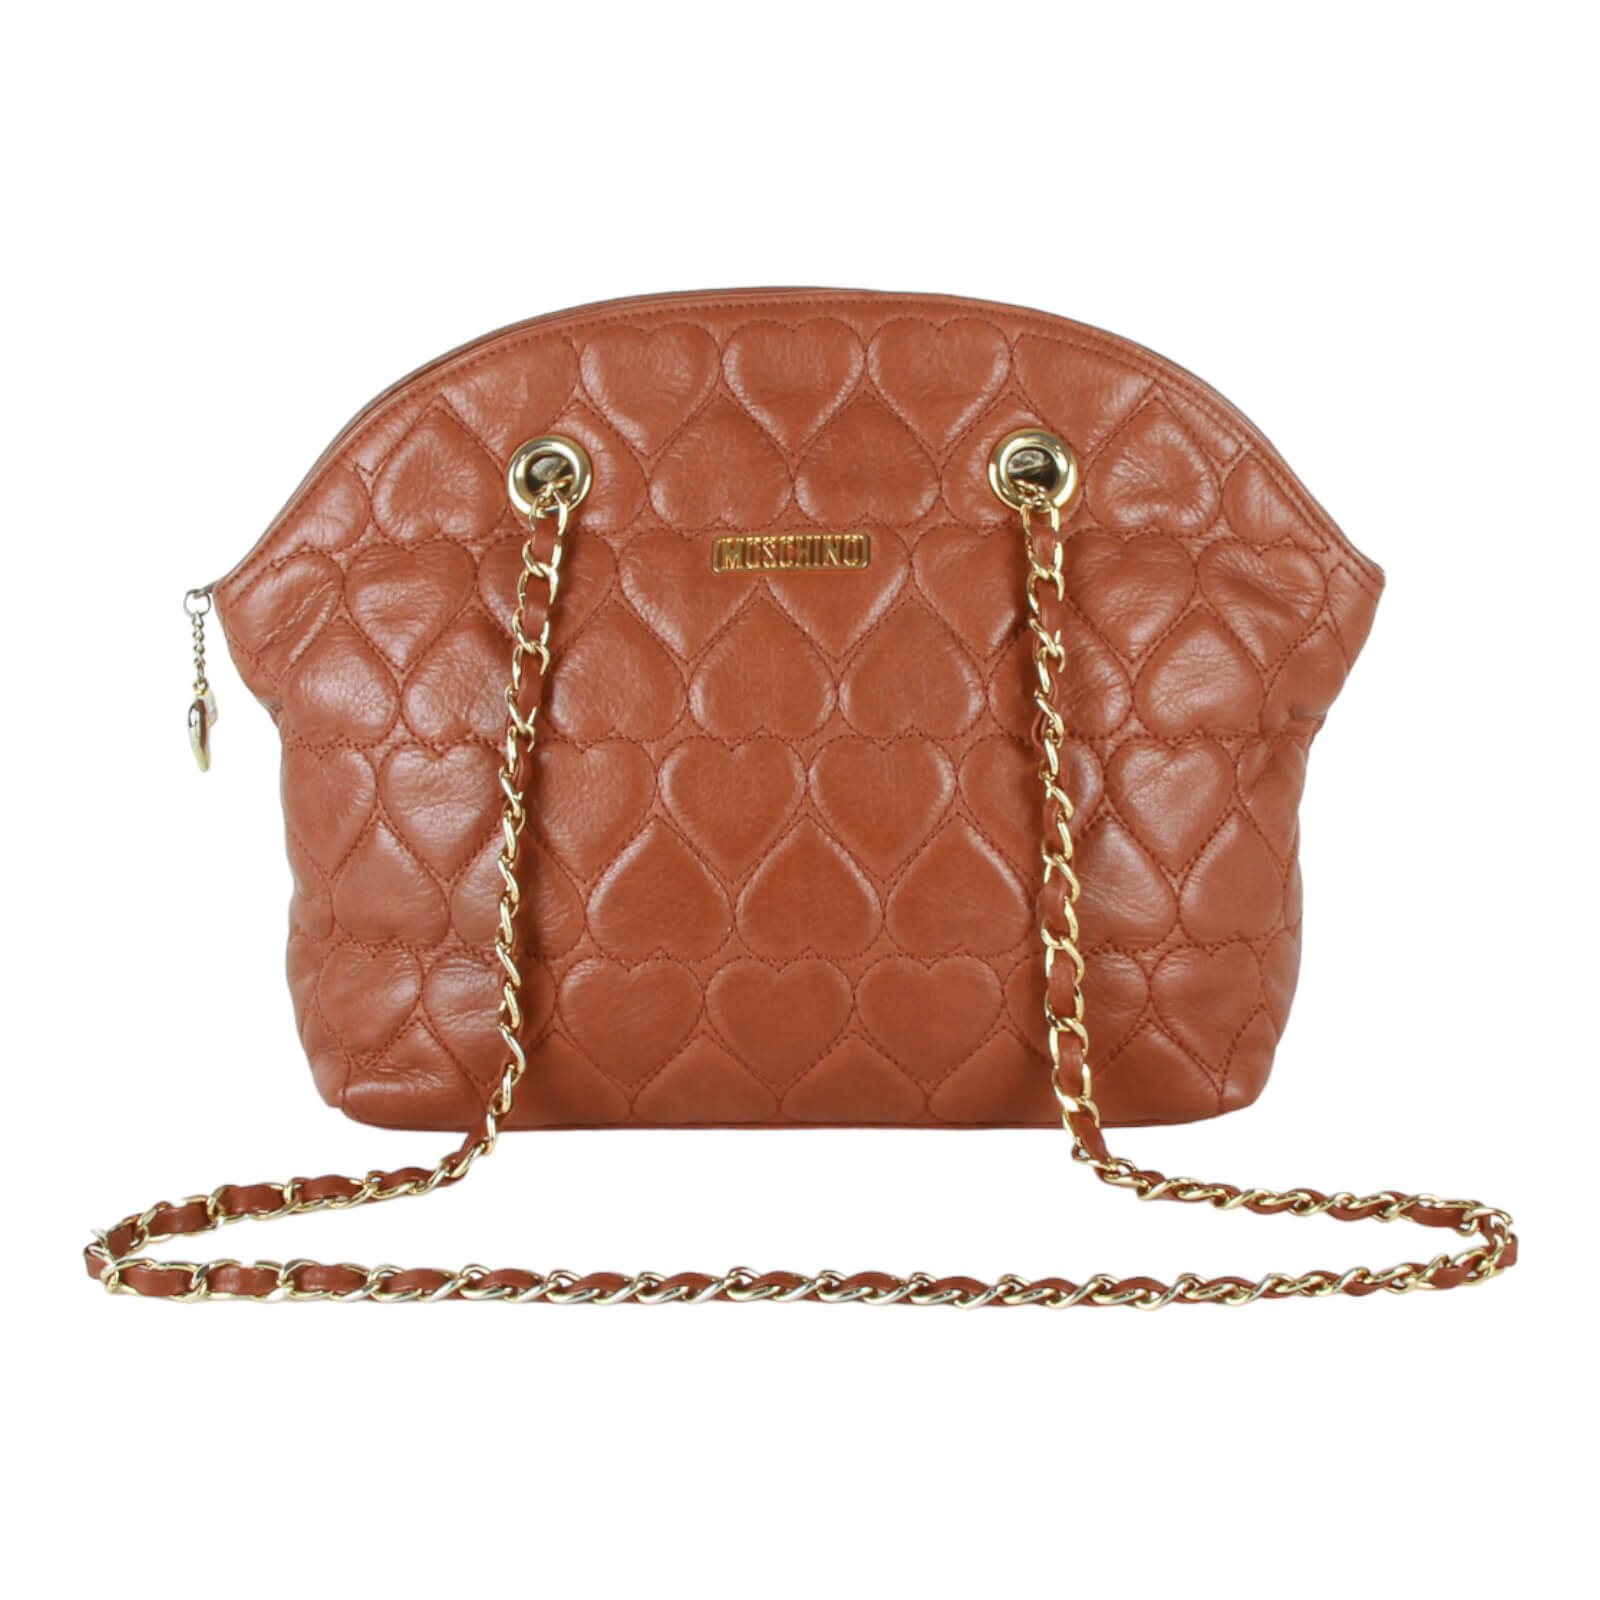 Fall in love with these heart-shaped handbags